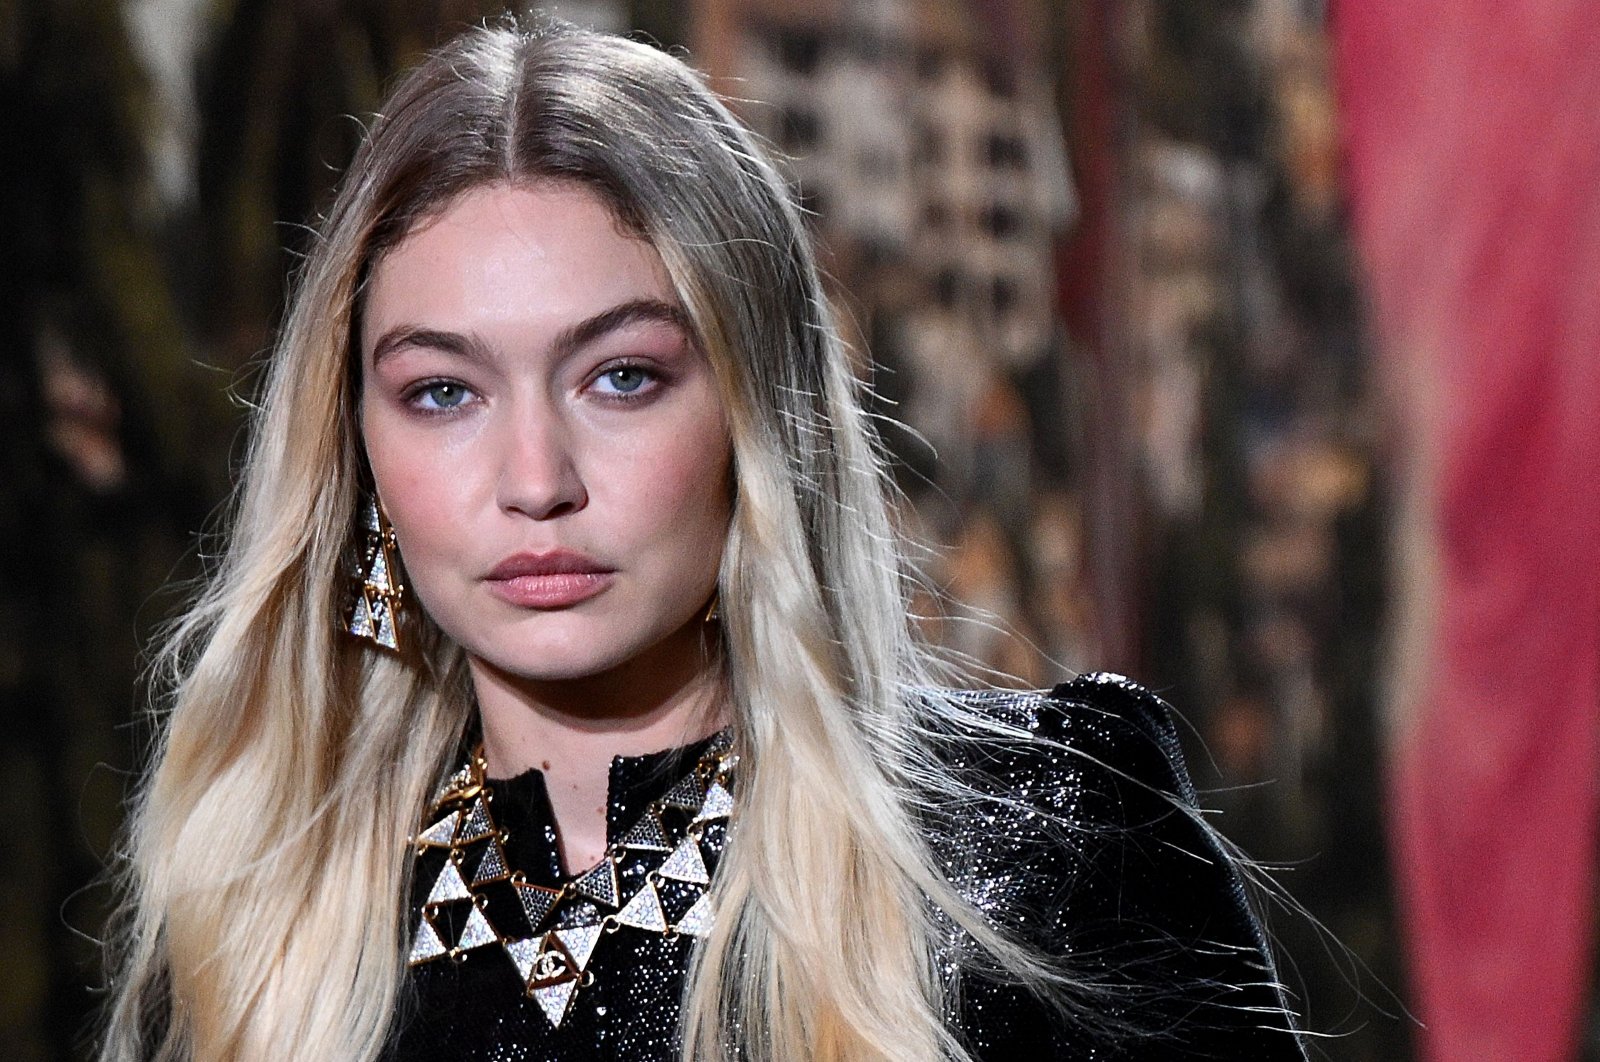 U.S. Model Gigi Hadid walks the runway to present a creation by Chanel during the Paris Fashion Week Womenswear Spring/Summer 2024 at the Grand Palais Ephemere in Paris, France, Oct. 3, 2023. (AFP Photo)